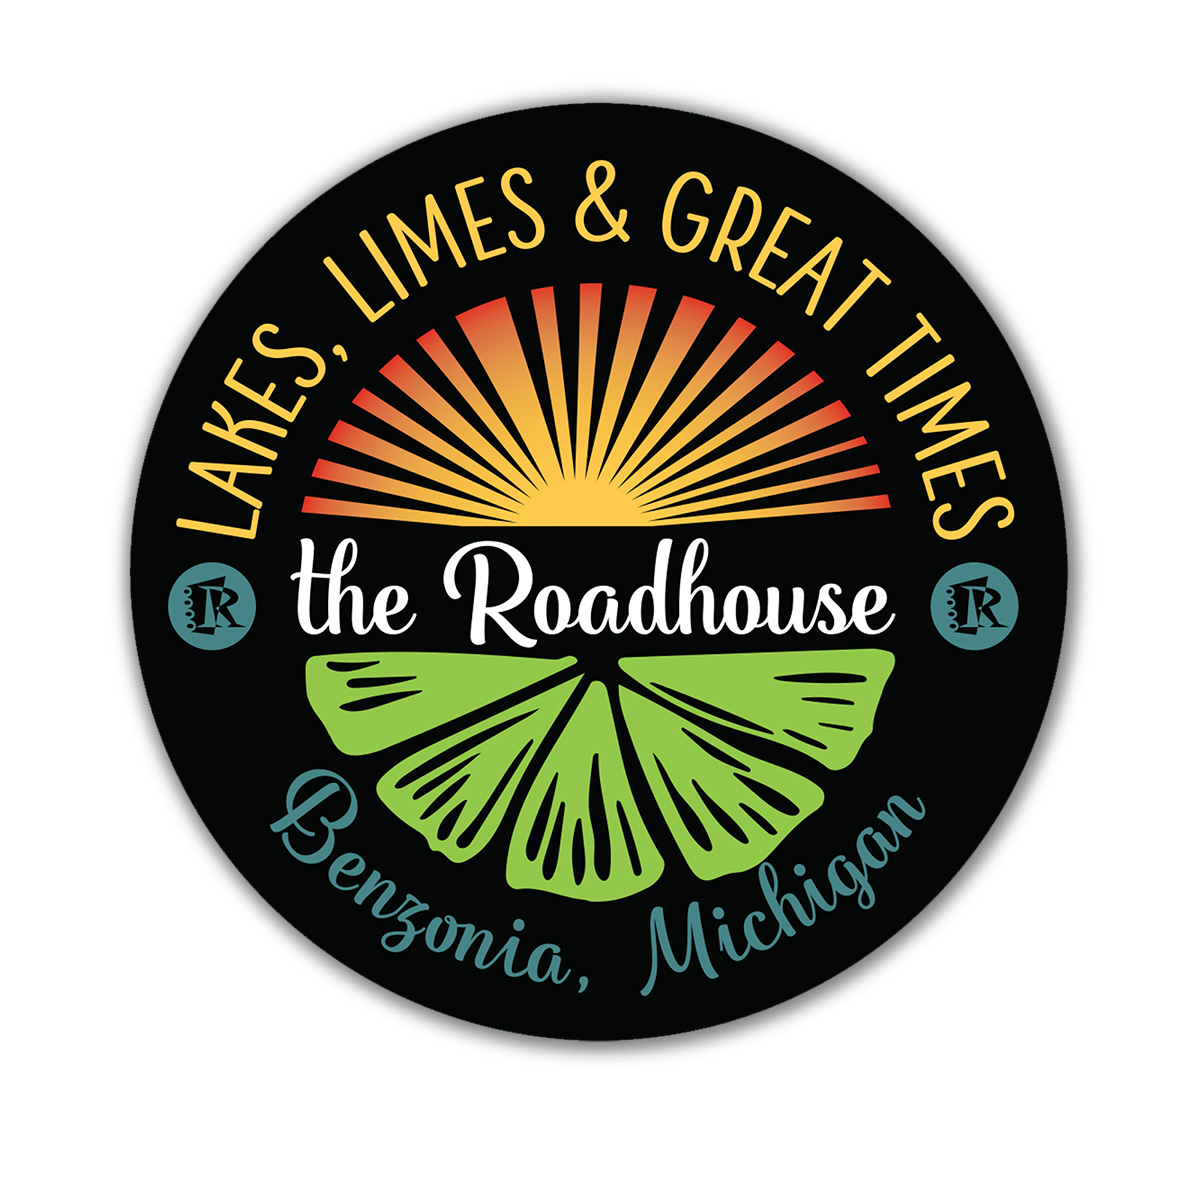 Roadhouse Great Times sticker